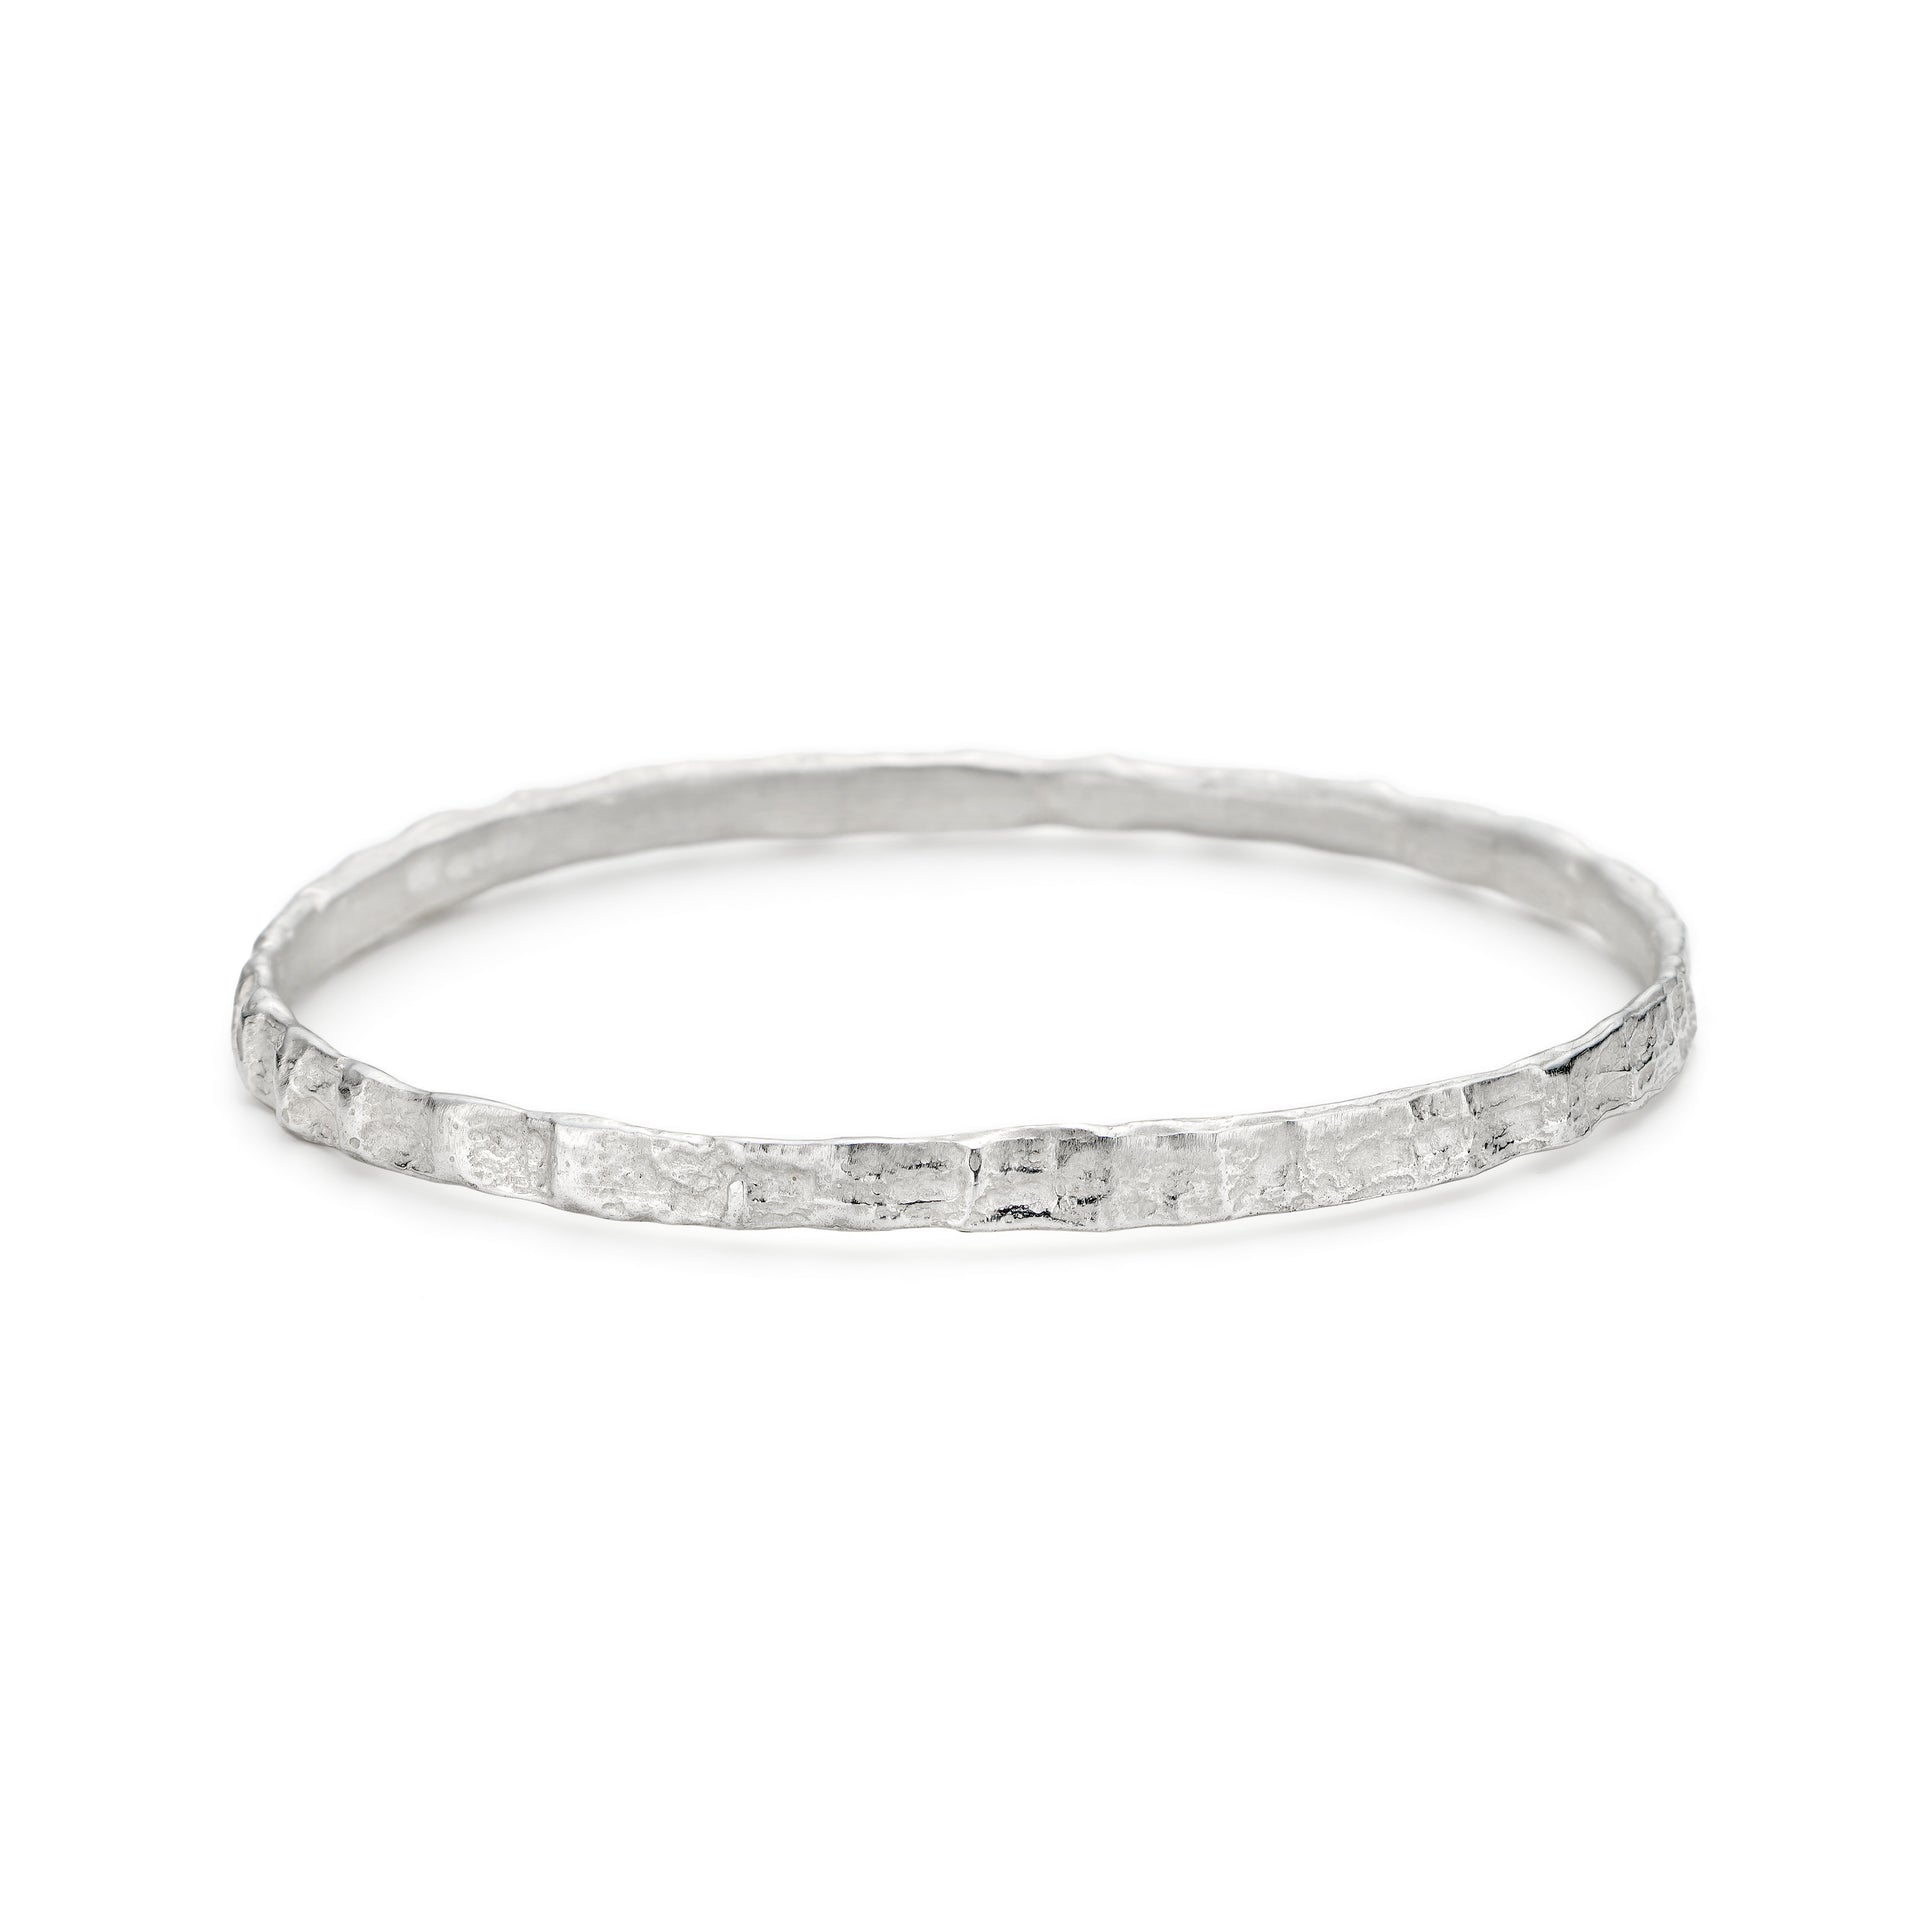 Emily's fine simple silver bangle with natural texture